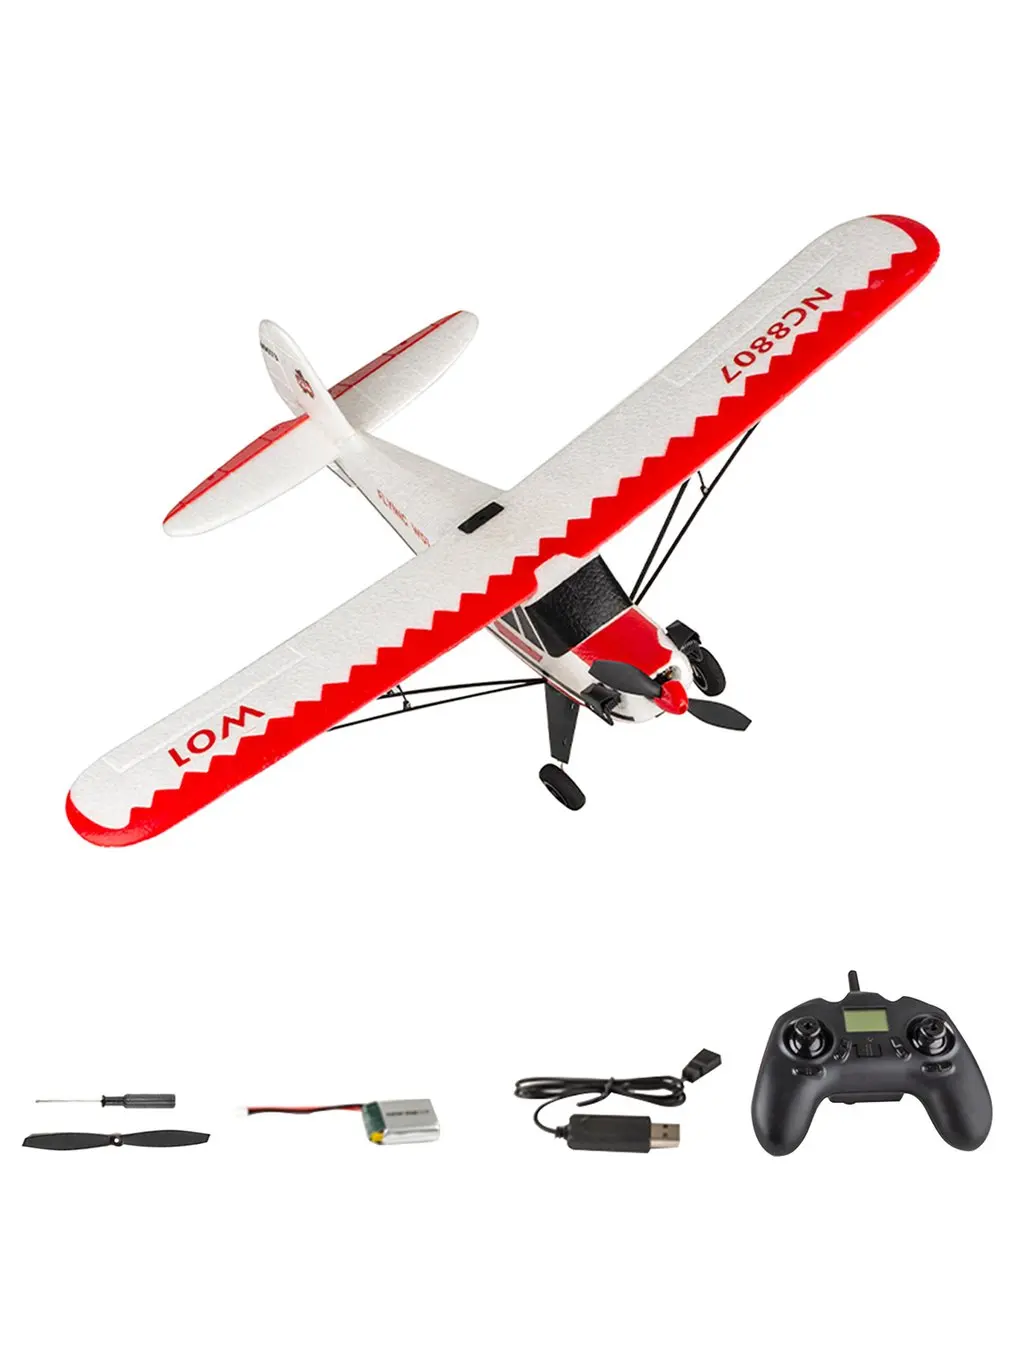 

W01 2.4G 3CH Electric RC EPP Glider Airplane Six-axis Gyroscope RTF Right Hand Throttle With Transmitter Gifts For Beginners